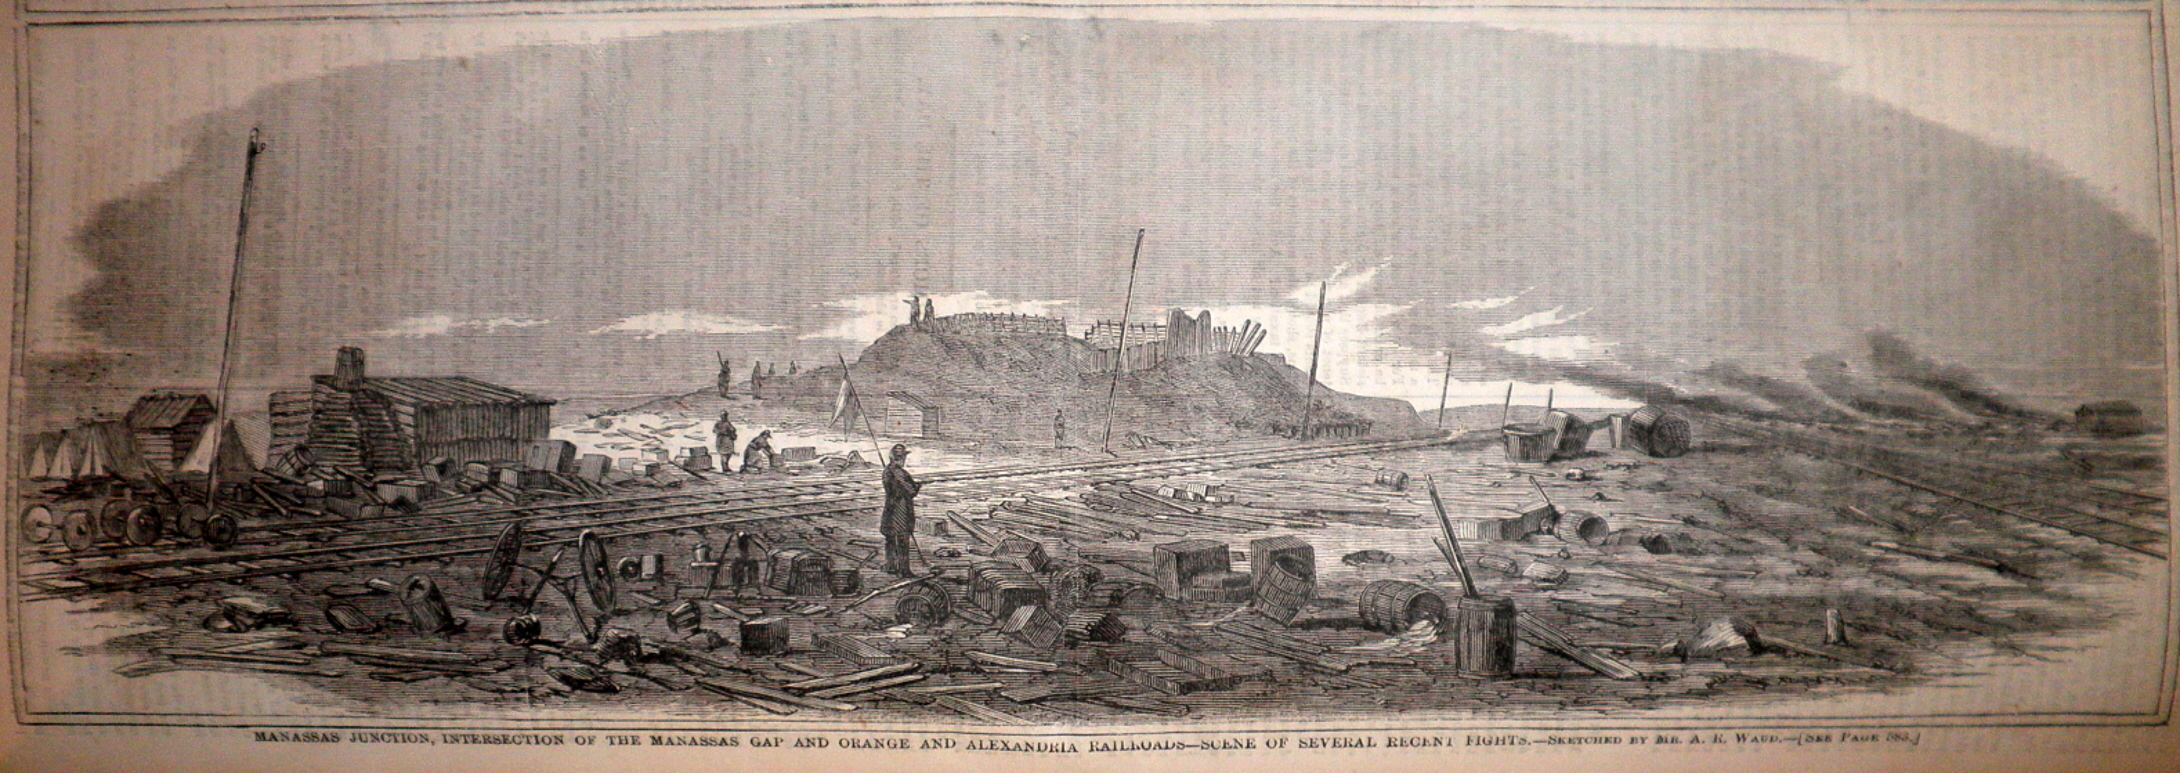 'Intersection of the Orange and Alexandria Railroad with the Manassas Gap Railroad' Harper's Weekly, March 29, 1862